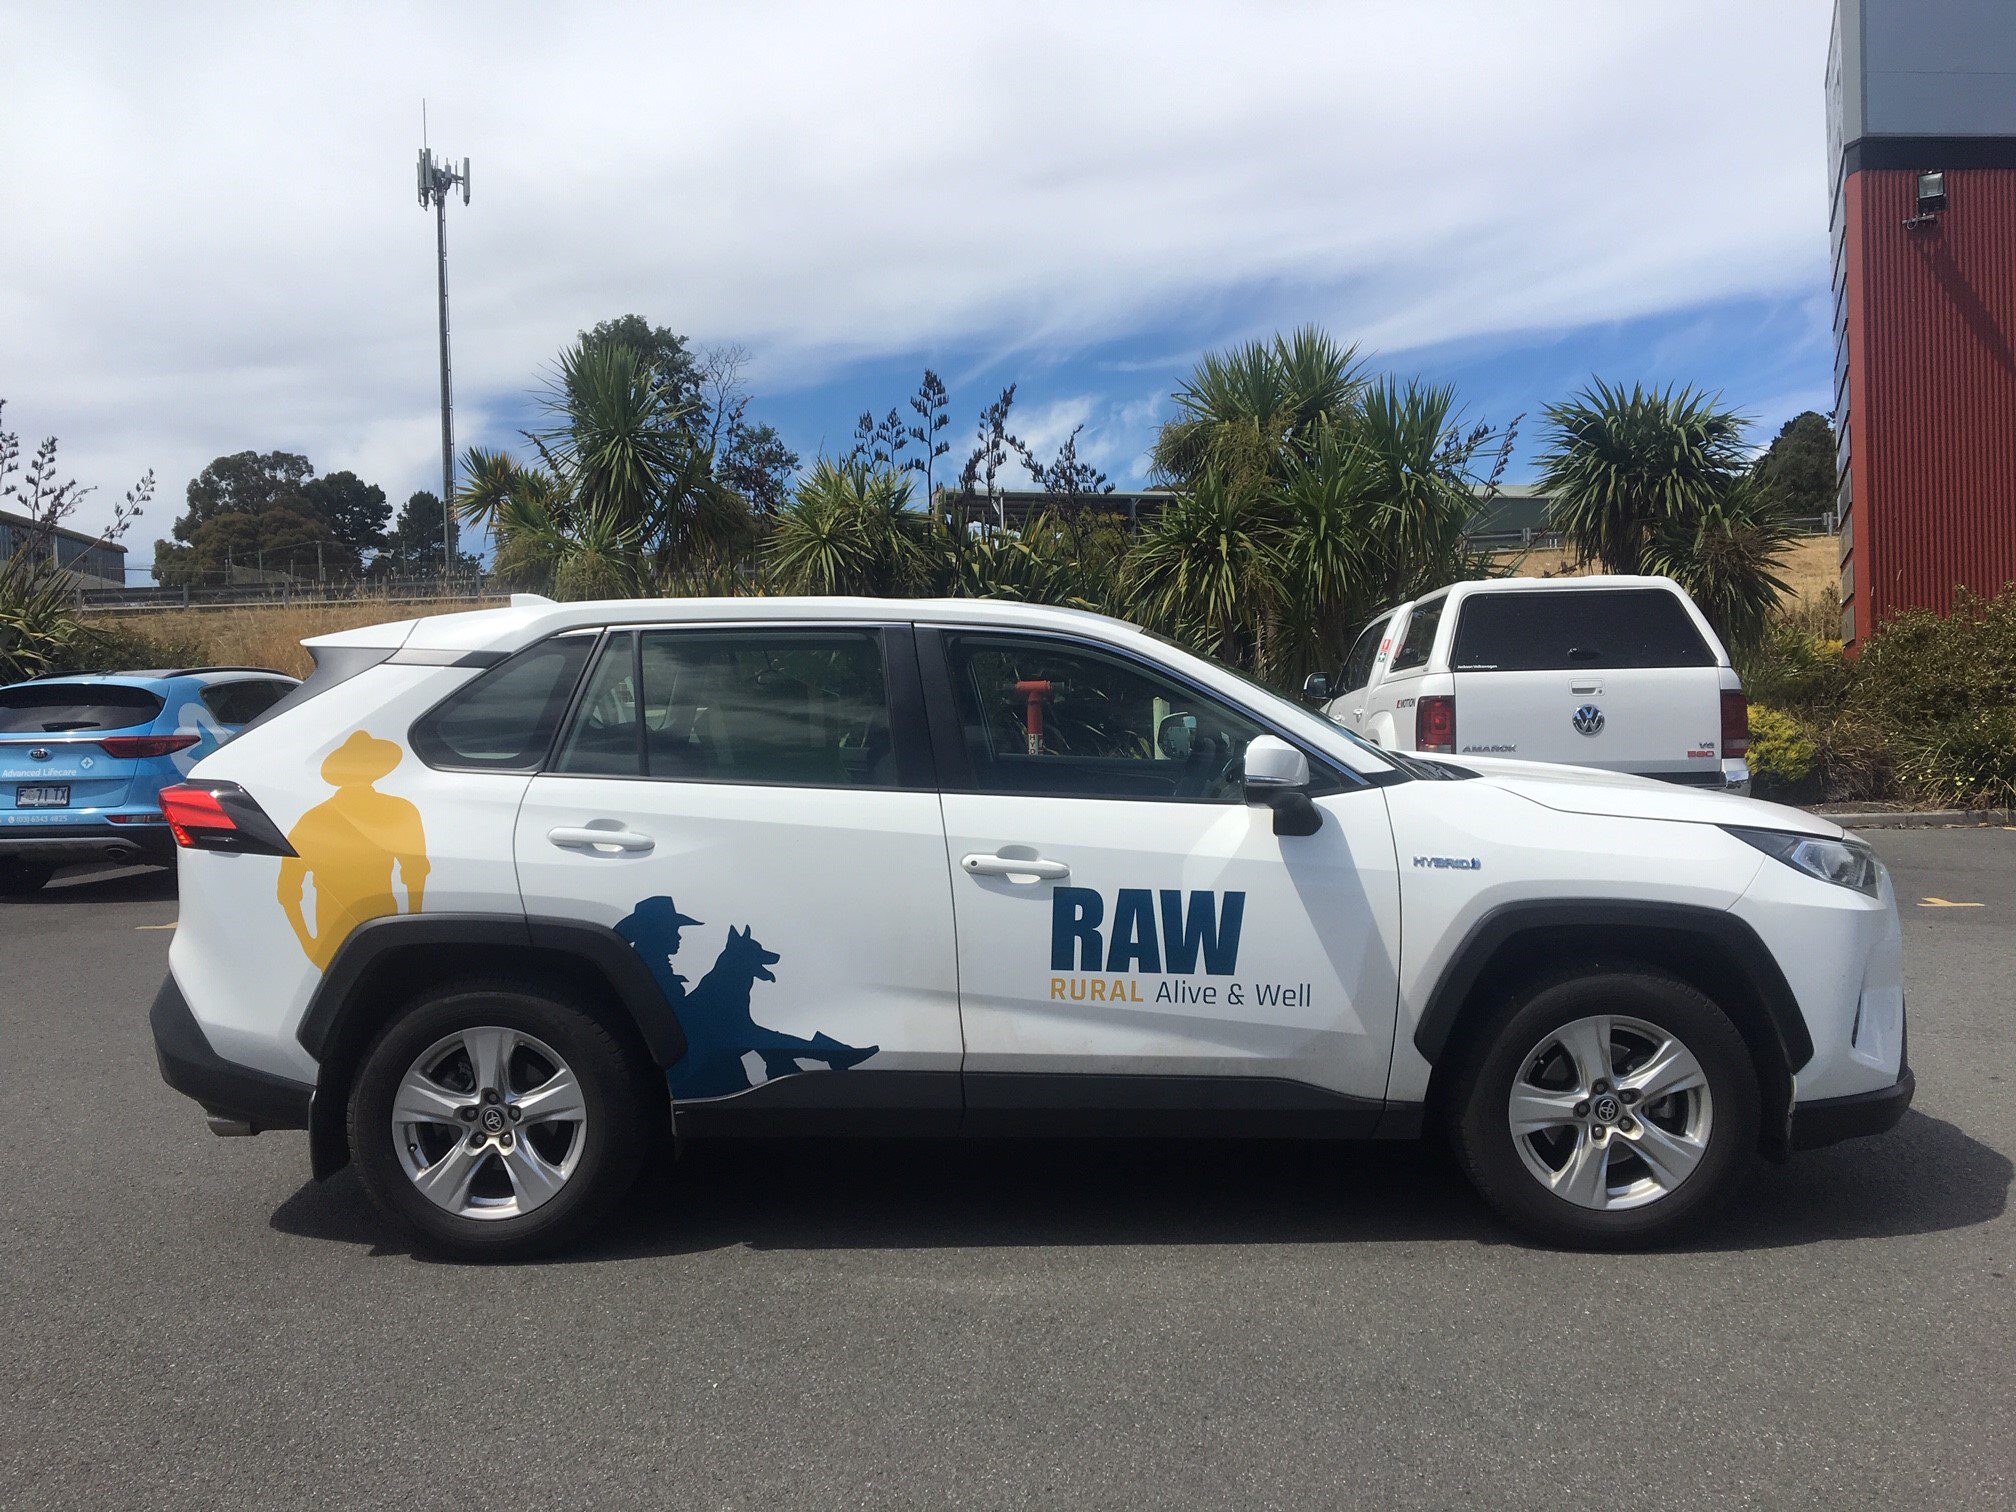 Rural Alive & Well, Vehicle Wraps